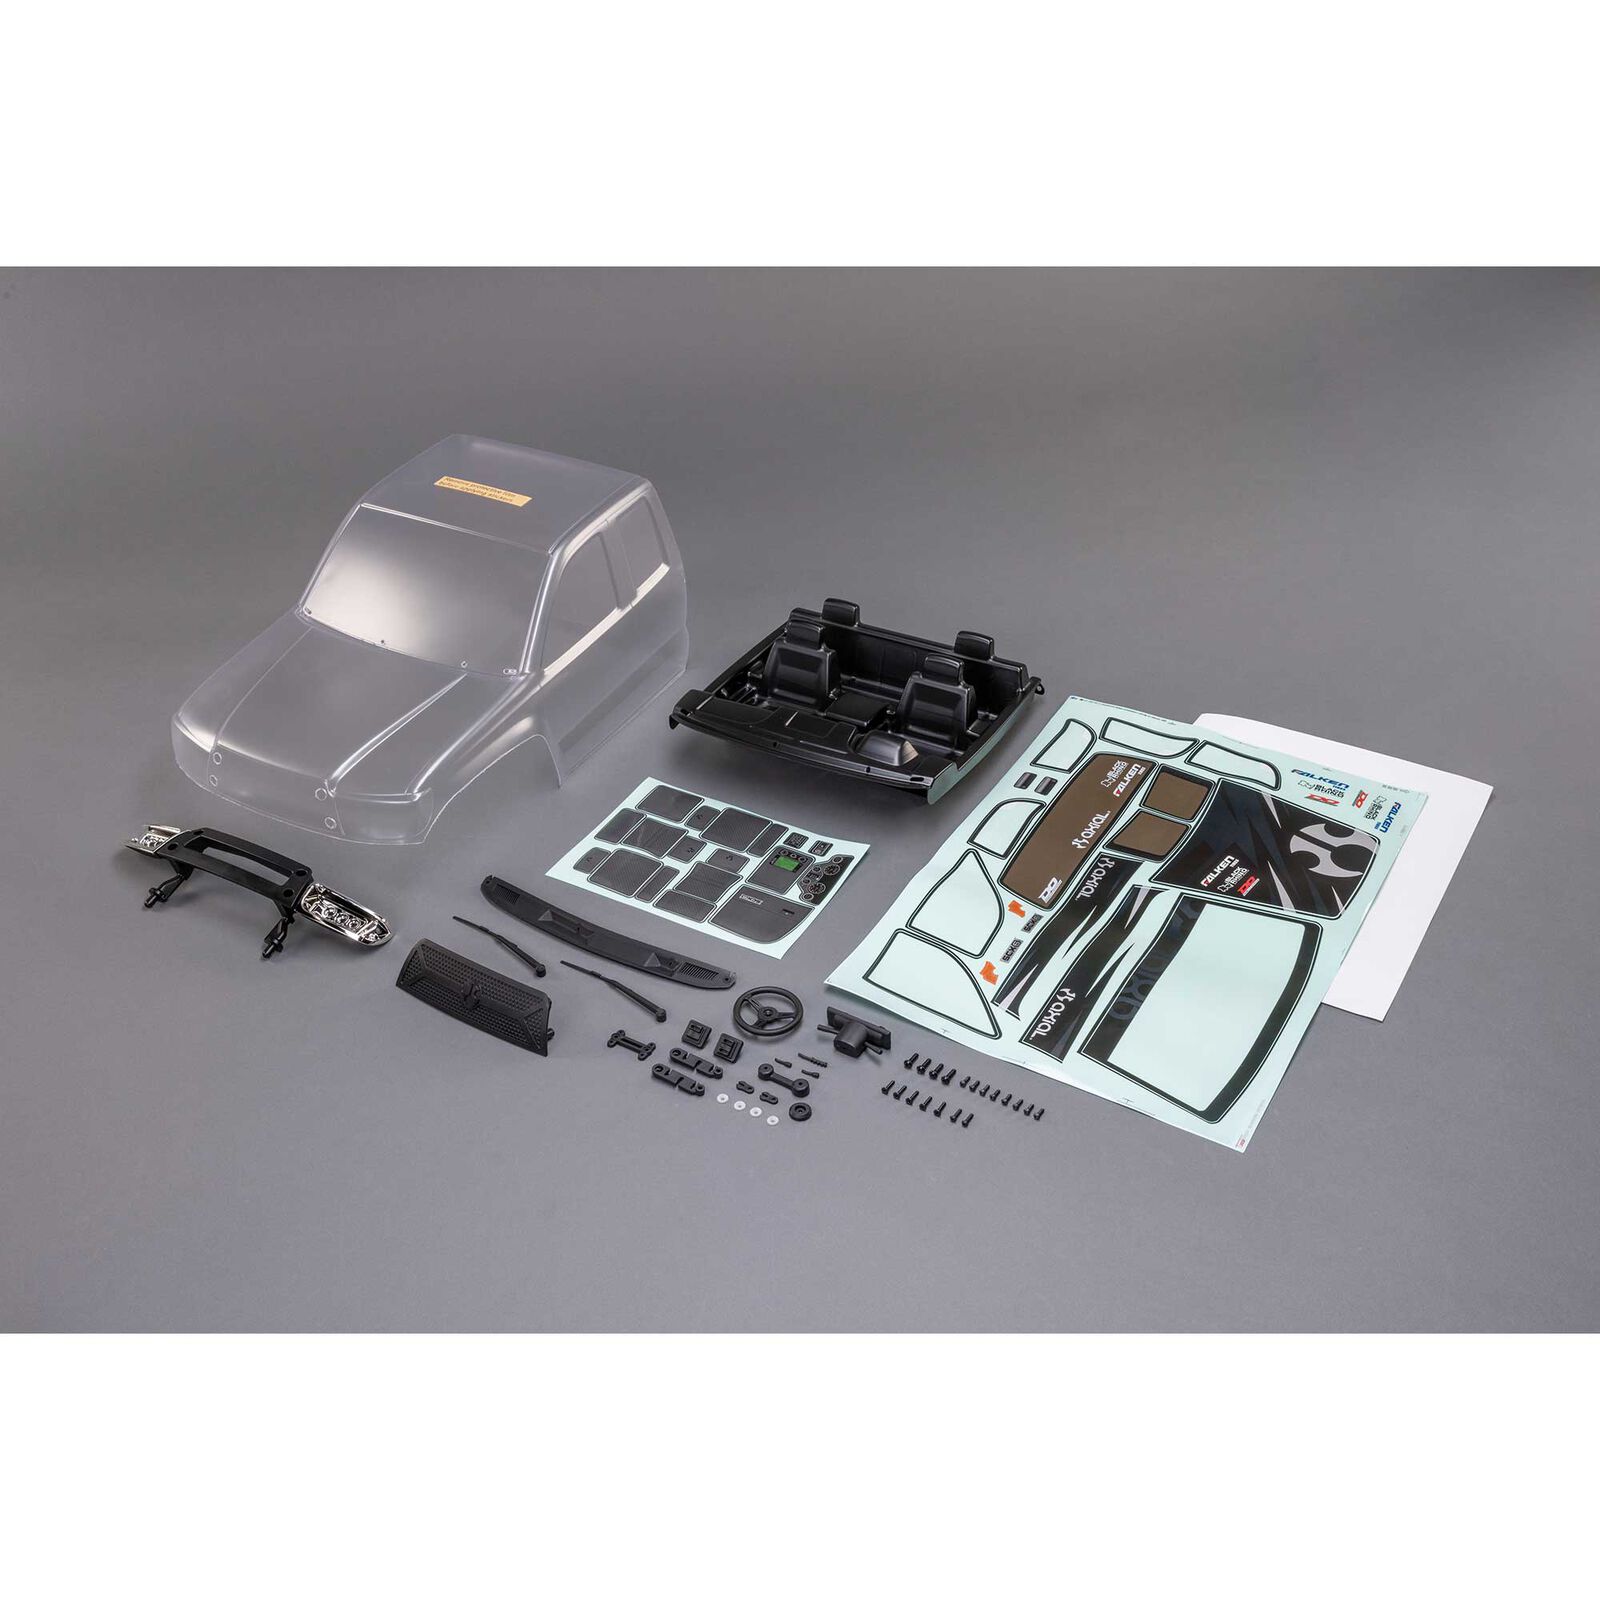 Tuning parts for RC cars at Modellsport Schweighofer - Order online now